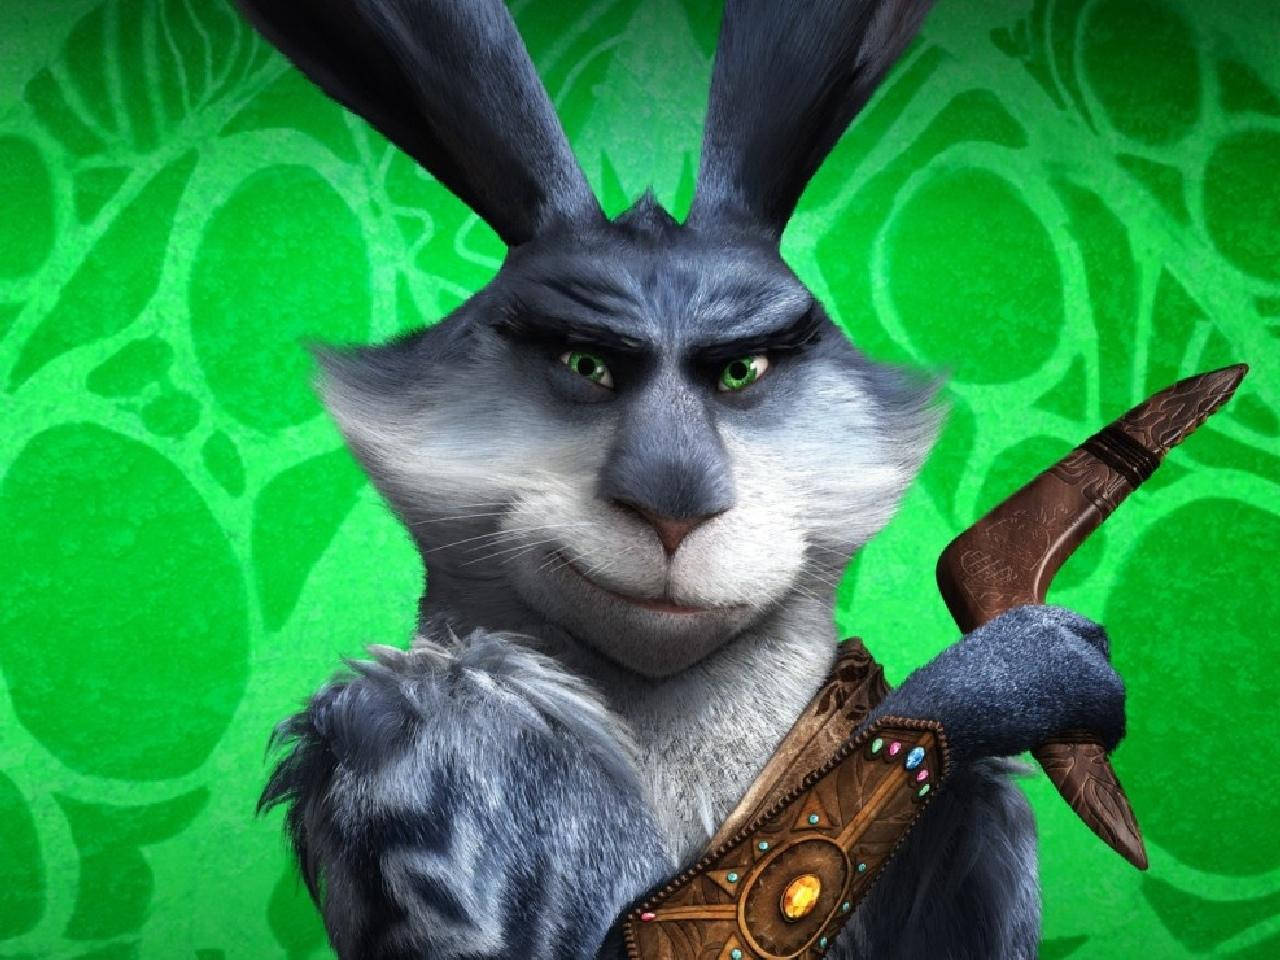 rise of the guardians easter bunny human